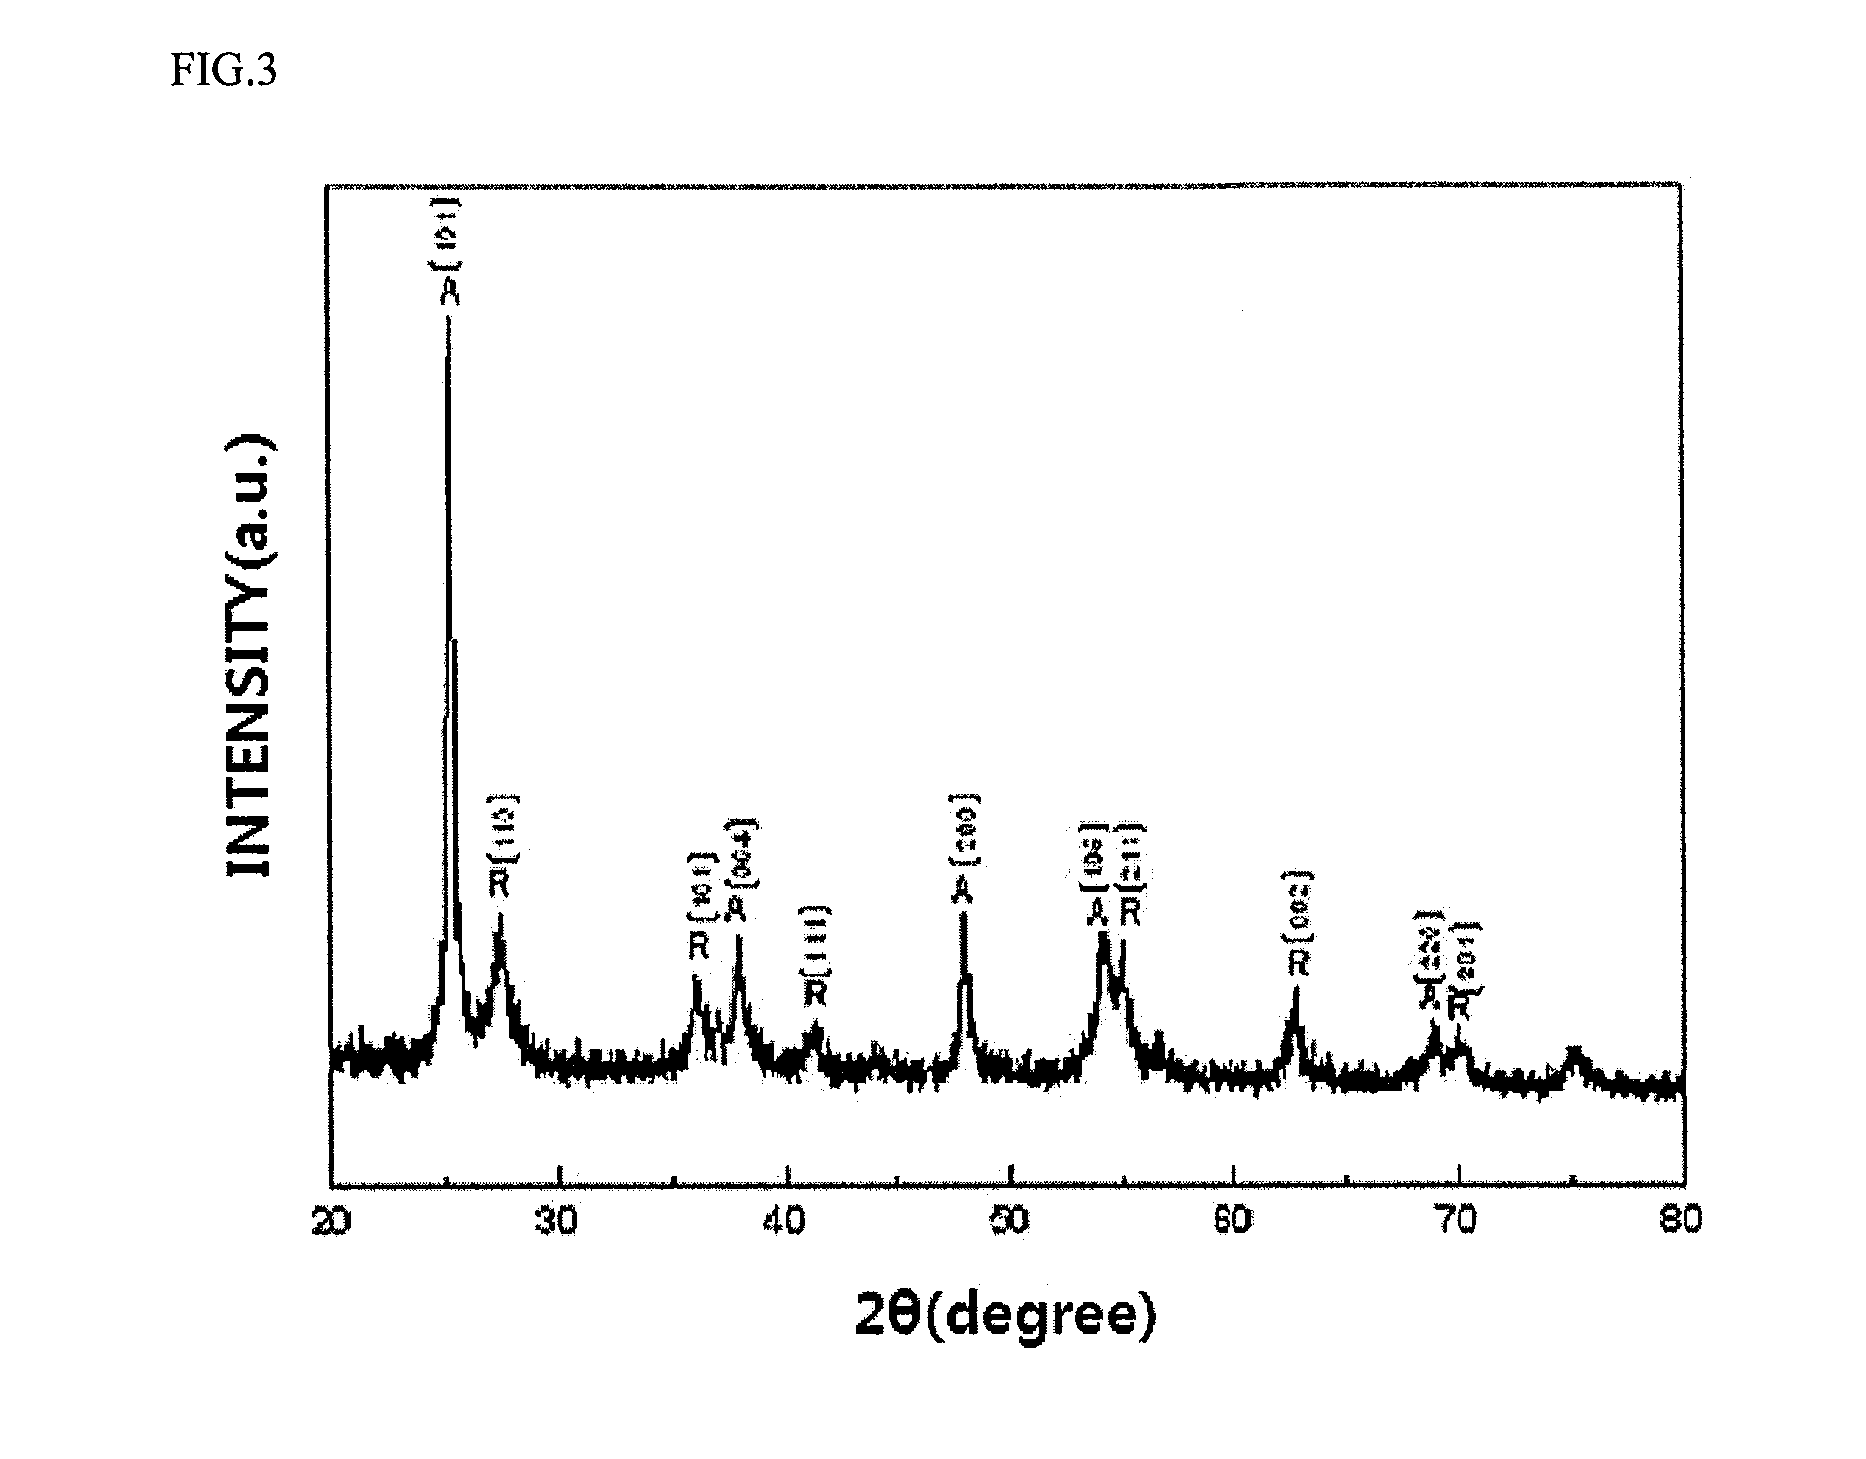 Metal complex of fluorinated tin oxide and titanium oxide and preparation method thereof